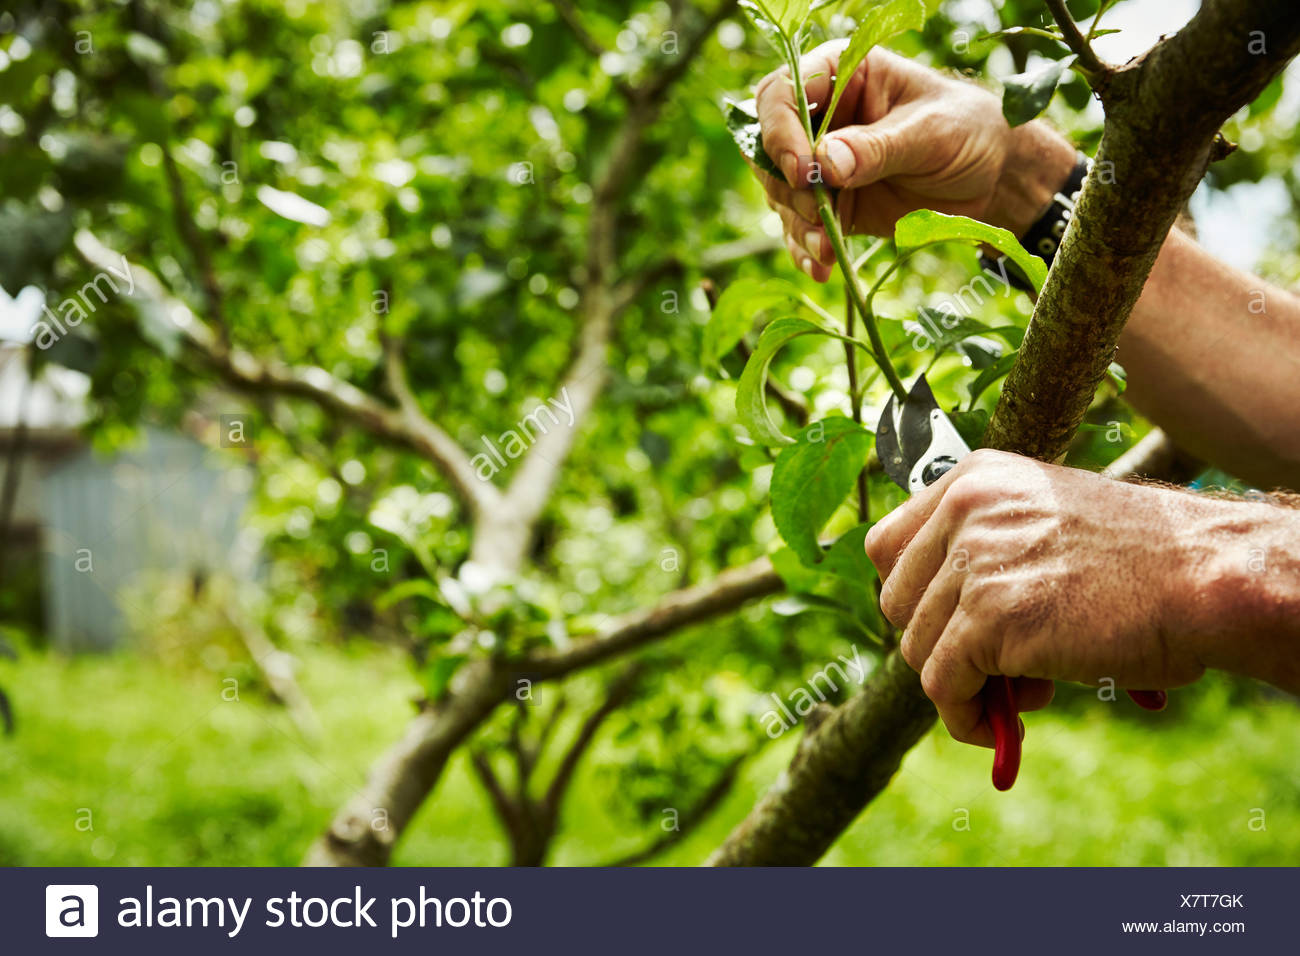 How To Trim Fruit Trees / Fruit Tree Pruning In Ontario Baum Tree Care - What is the best time of year to trim your trees?